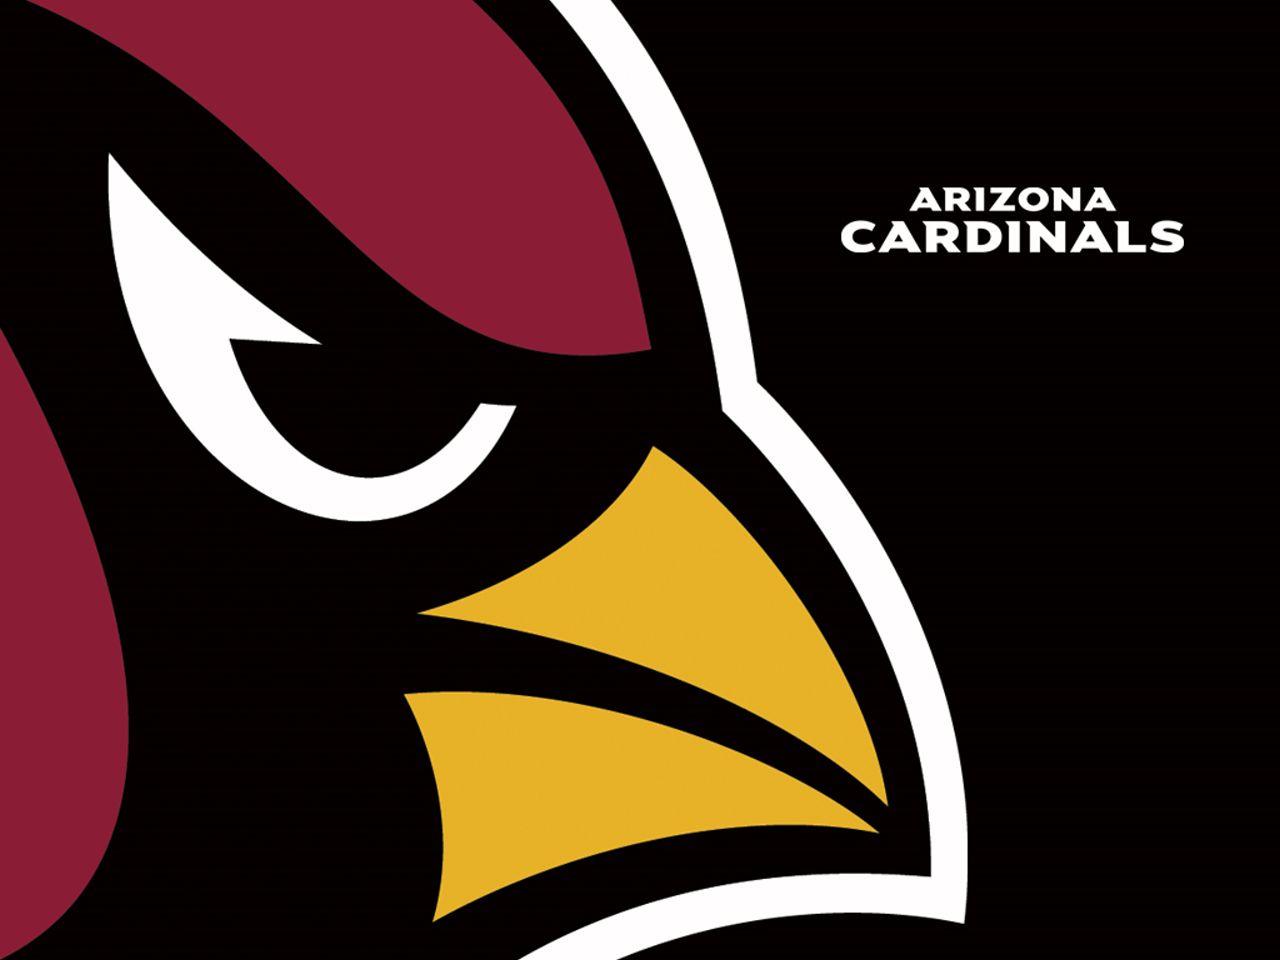 Download free arizona cardinals wallpaper for your mobile phone